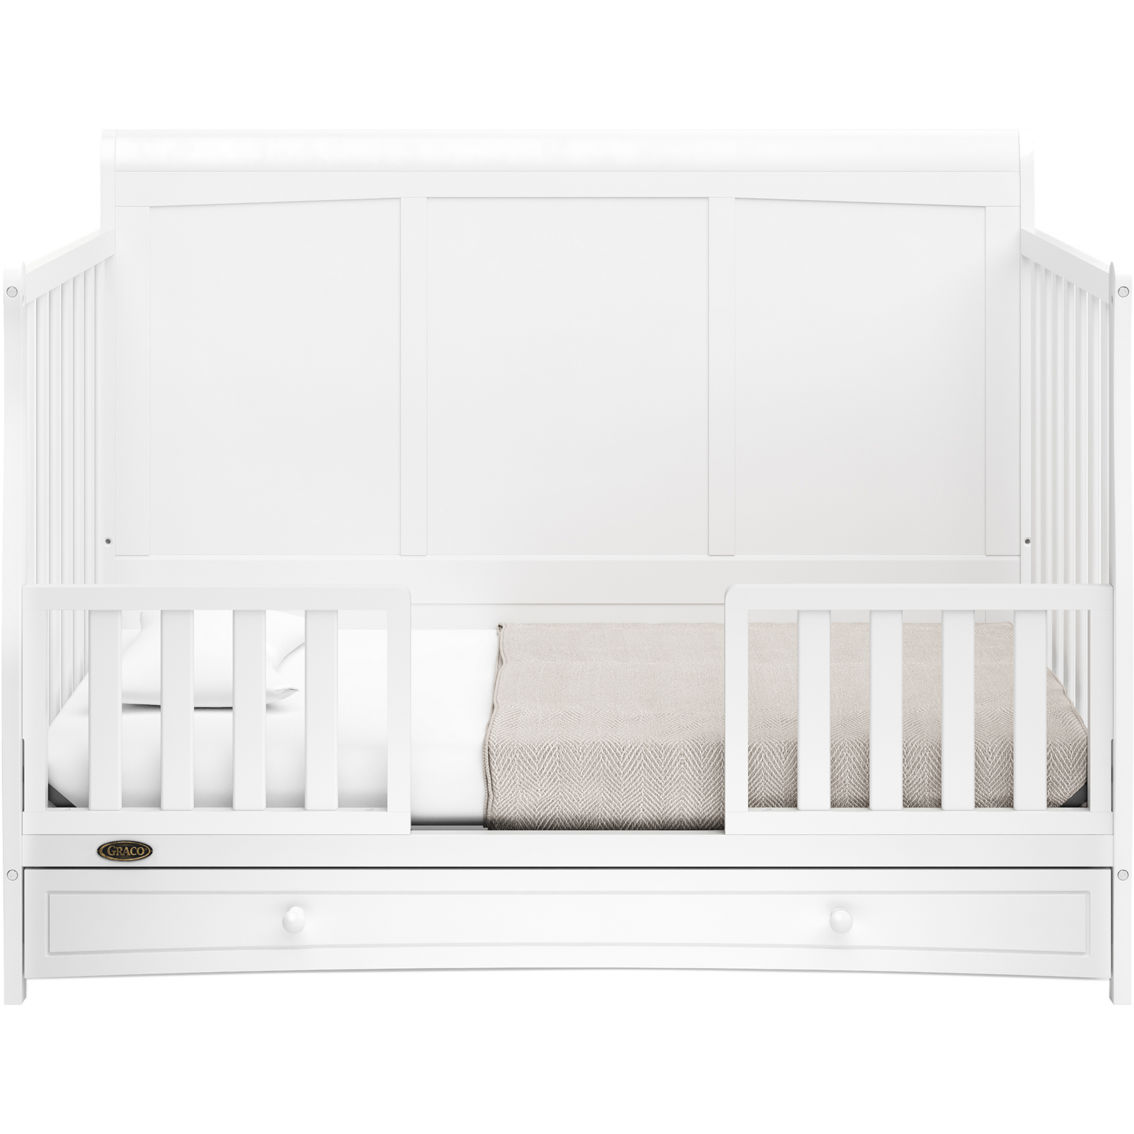 Graco Asheville 4-in-1 Convertible Crib with Drawer - Image 4 of 8